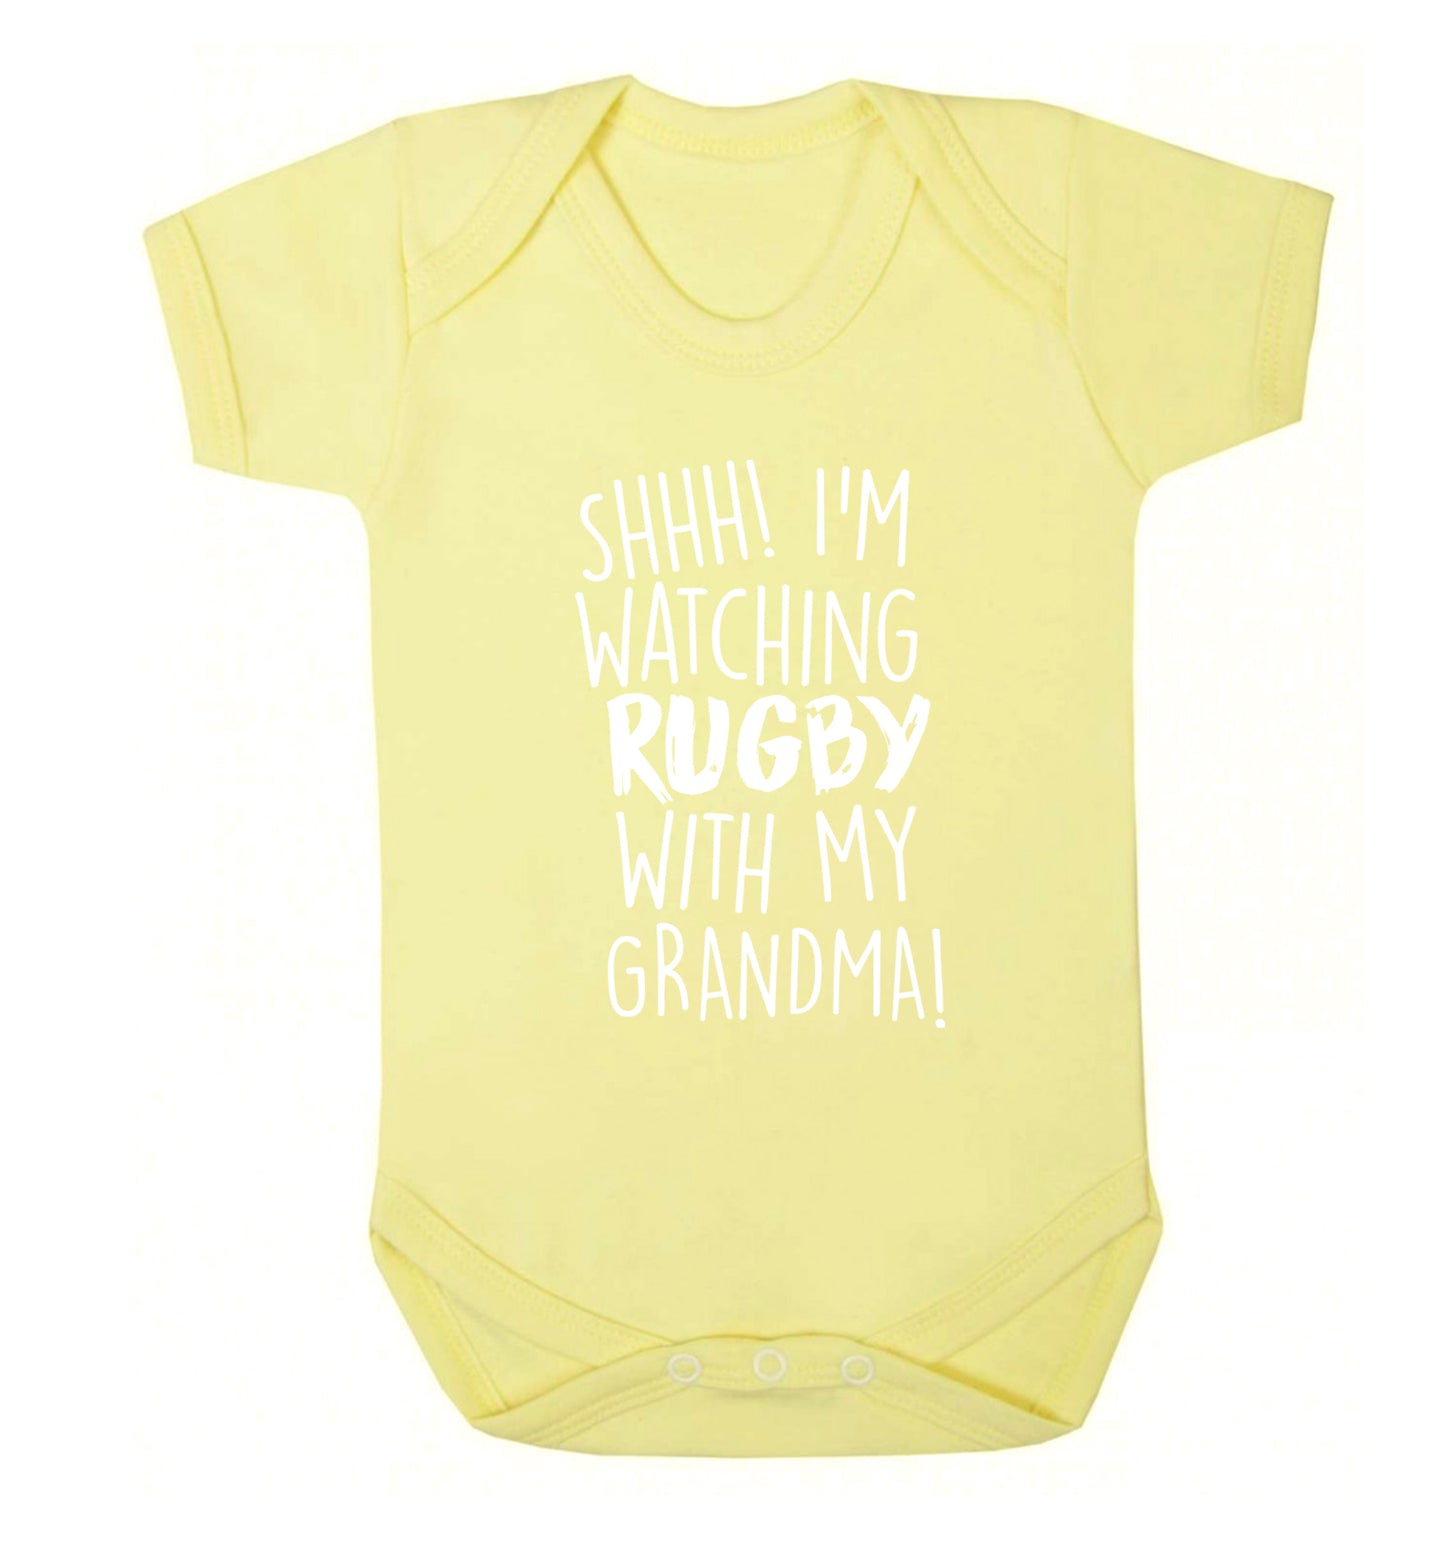 Shh I'm watching rugby with my grandma Baby Vest pale yellow 18-24 months